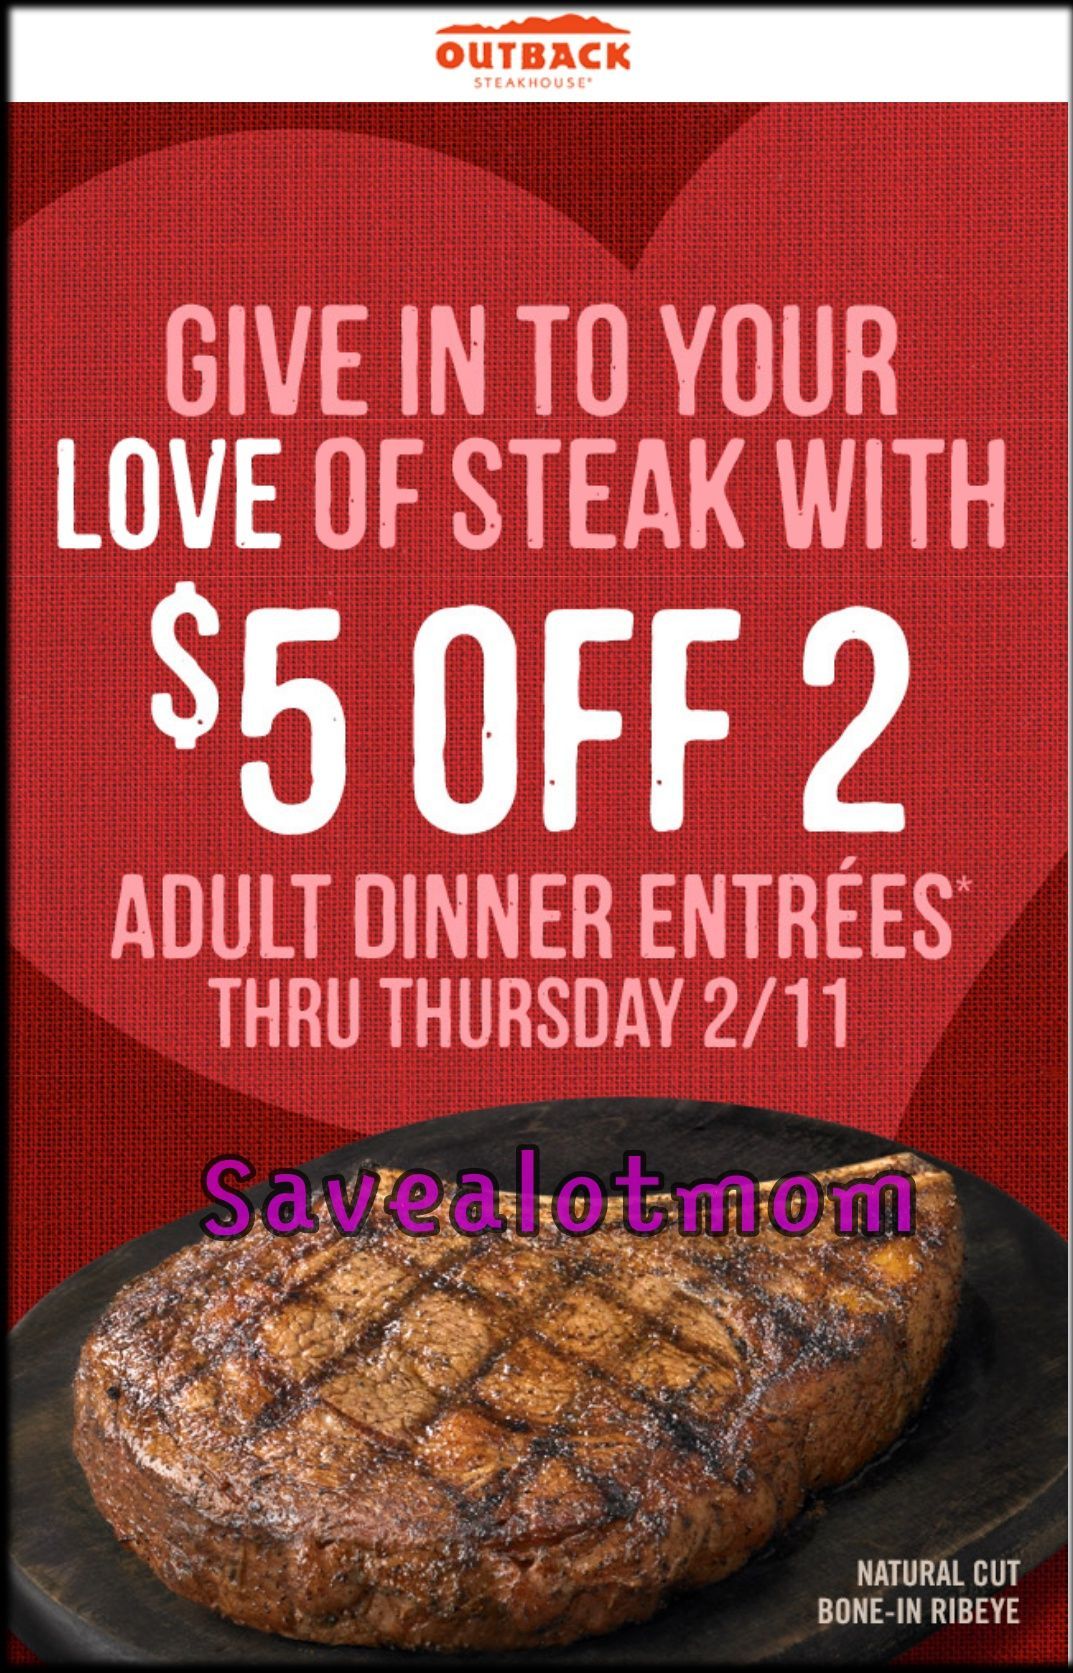 Outback Steakhouse 5 off Coupon and Valentine Meal Offer! Save A Lot